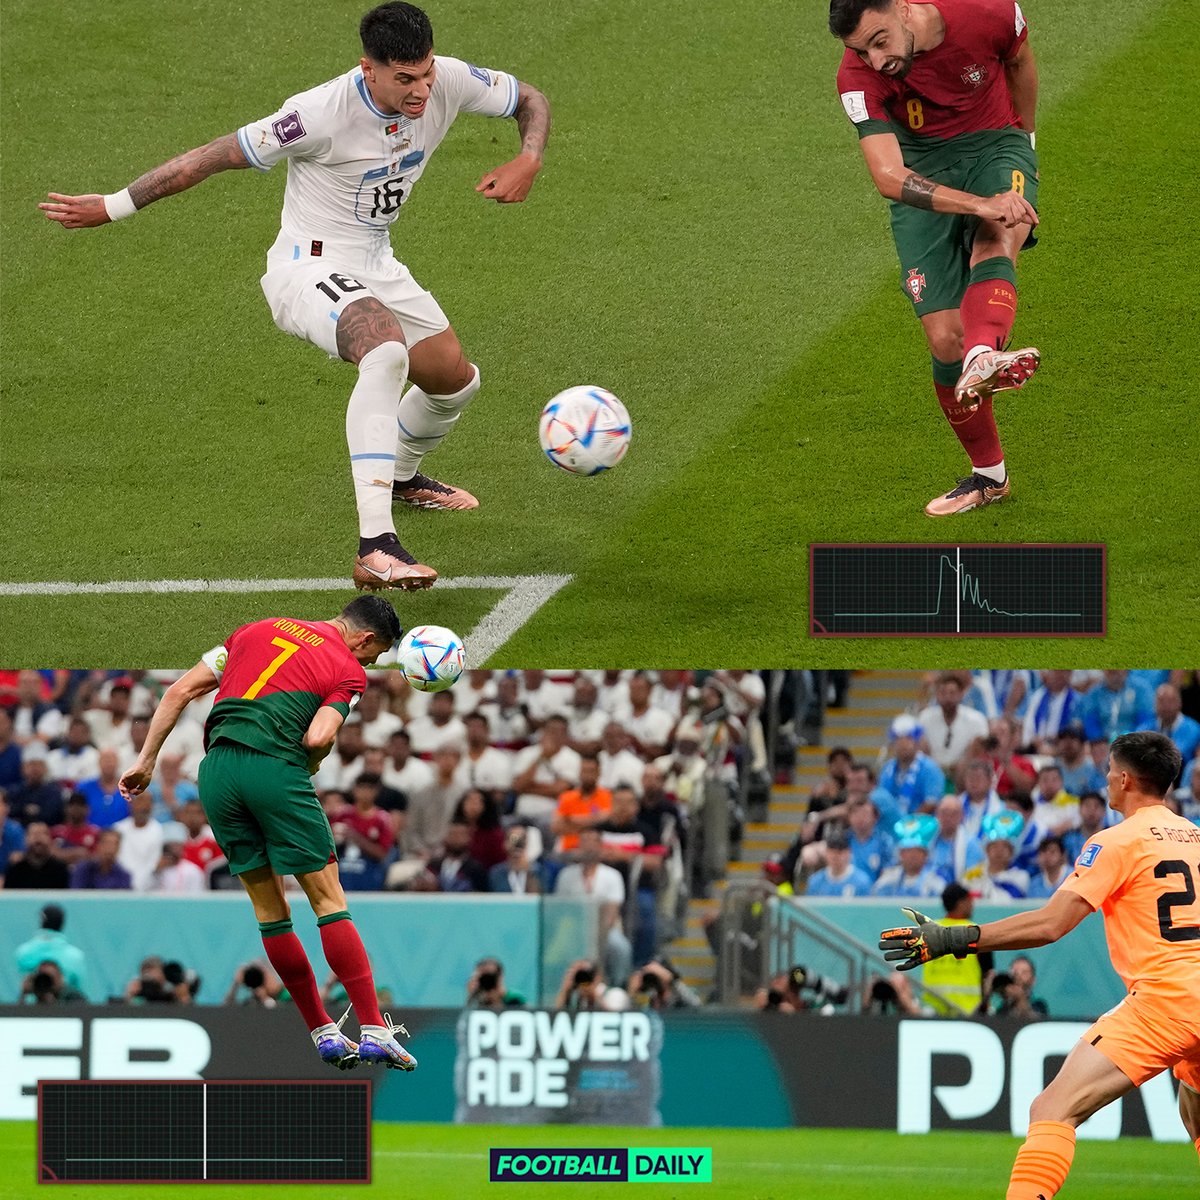 forsvar Bemærkelsesværdig Normalisering Football Daily on Twitter: "⚽️ Adidas have used the 500Hz IMU sensor inside  the match ball to show there was 𝐧𝐨 𝐜𝐨𝐧𝐭𝐚𝐜𝐭 from Cristiano Ronaldo  #FIFAWorldCup https://t.co/uEweubUwv1" / Twitter